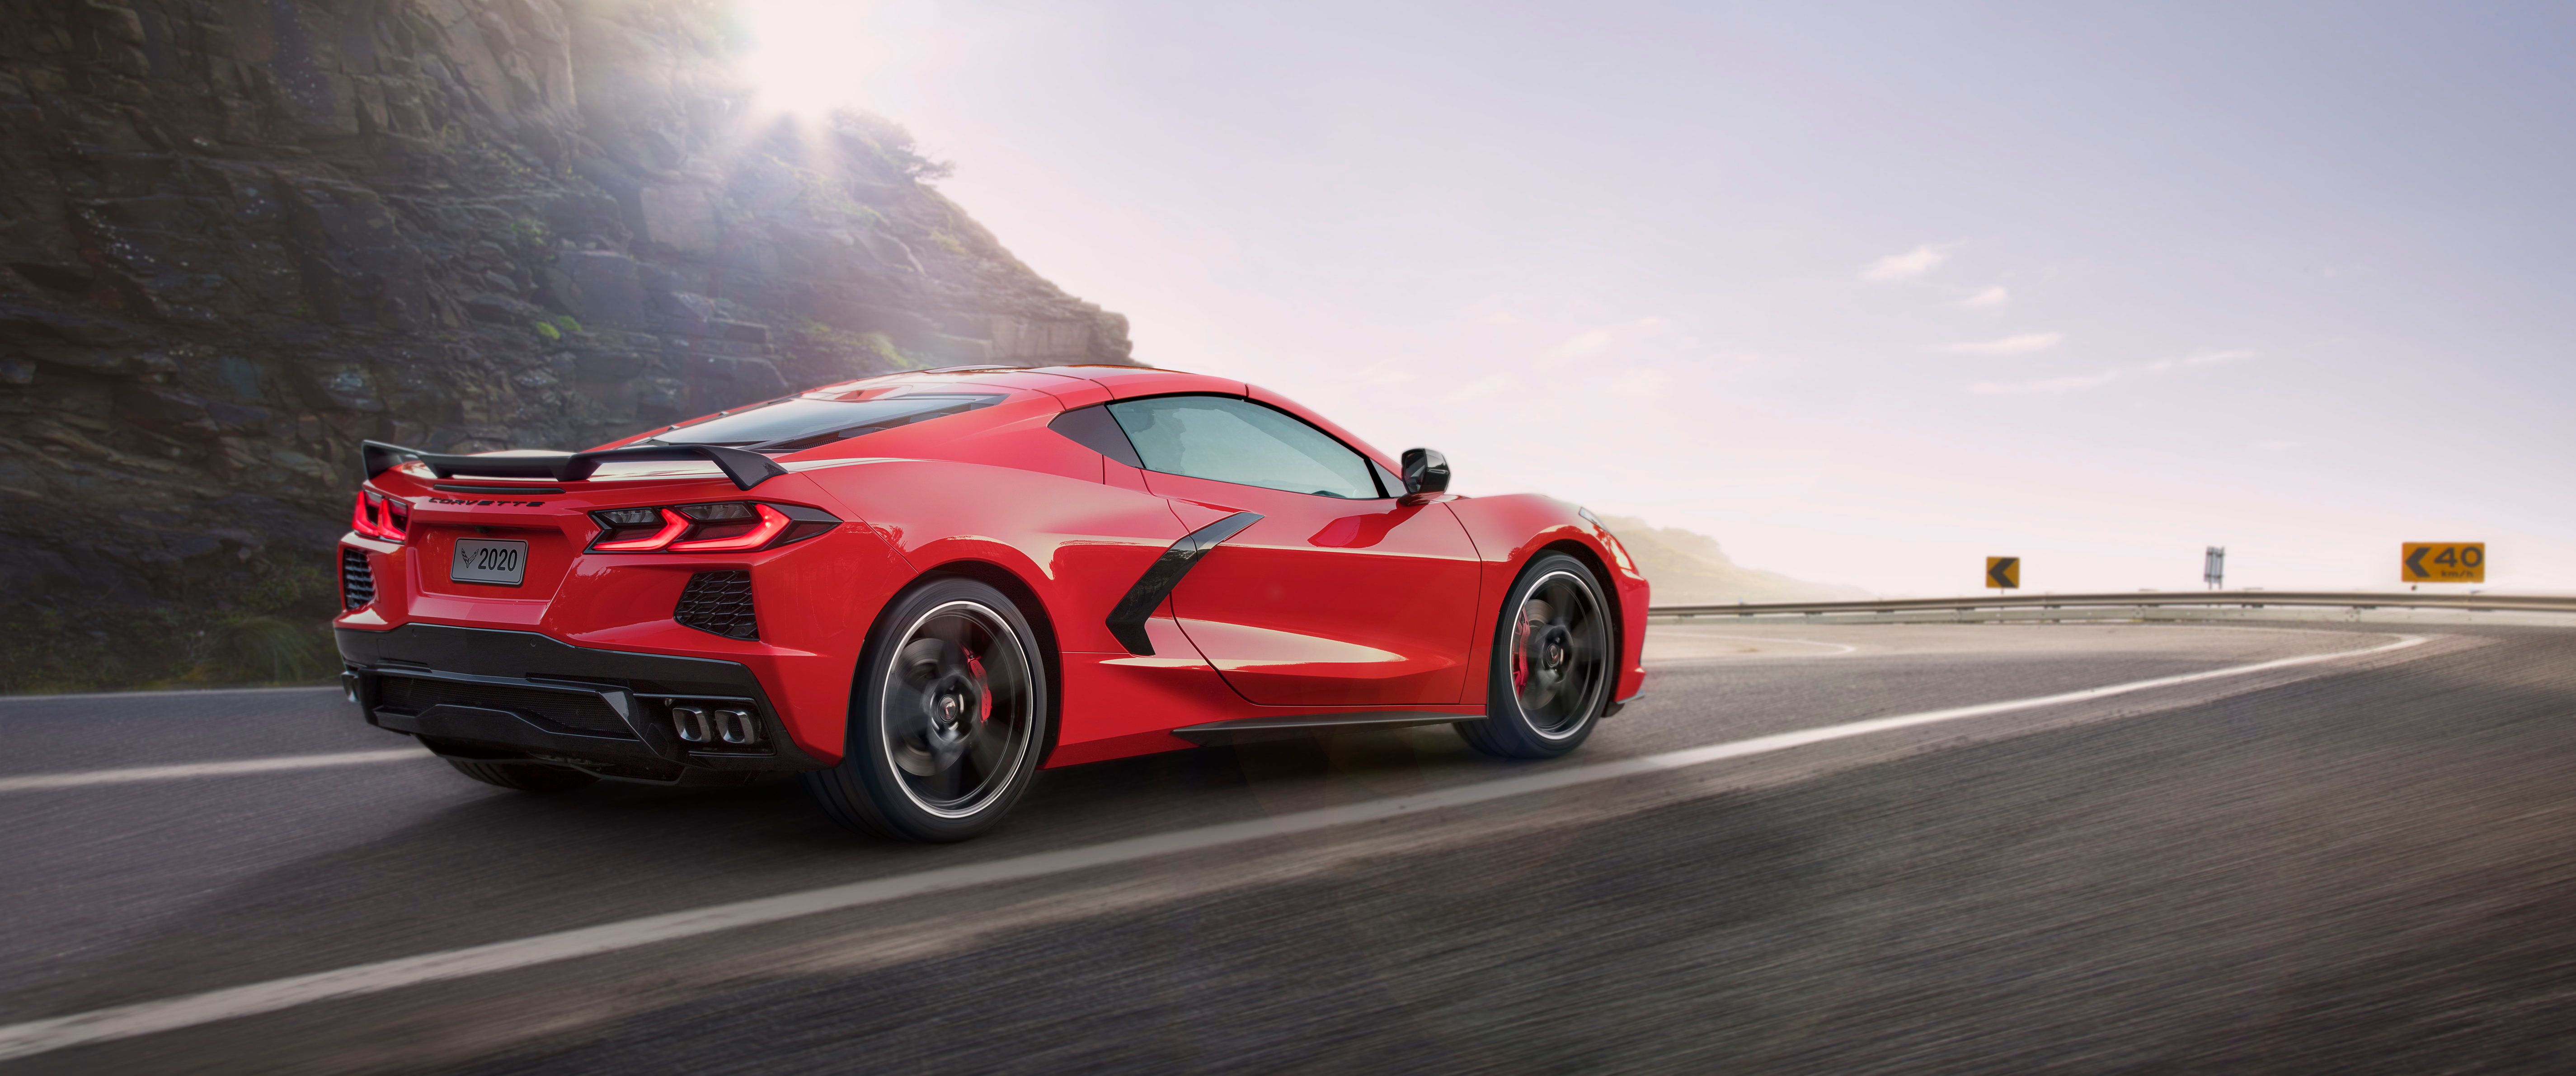 2019 $59,995 Corvette C8 Price Shows It Is the Best Bargain Mid-Engine Sports Car We Ever Had